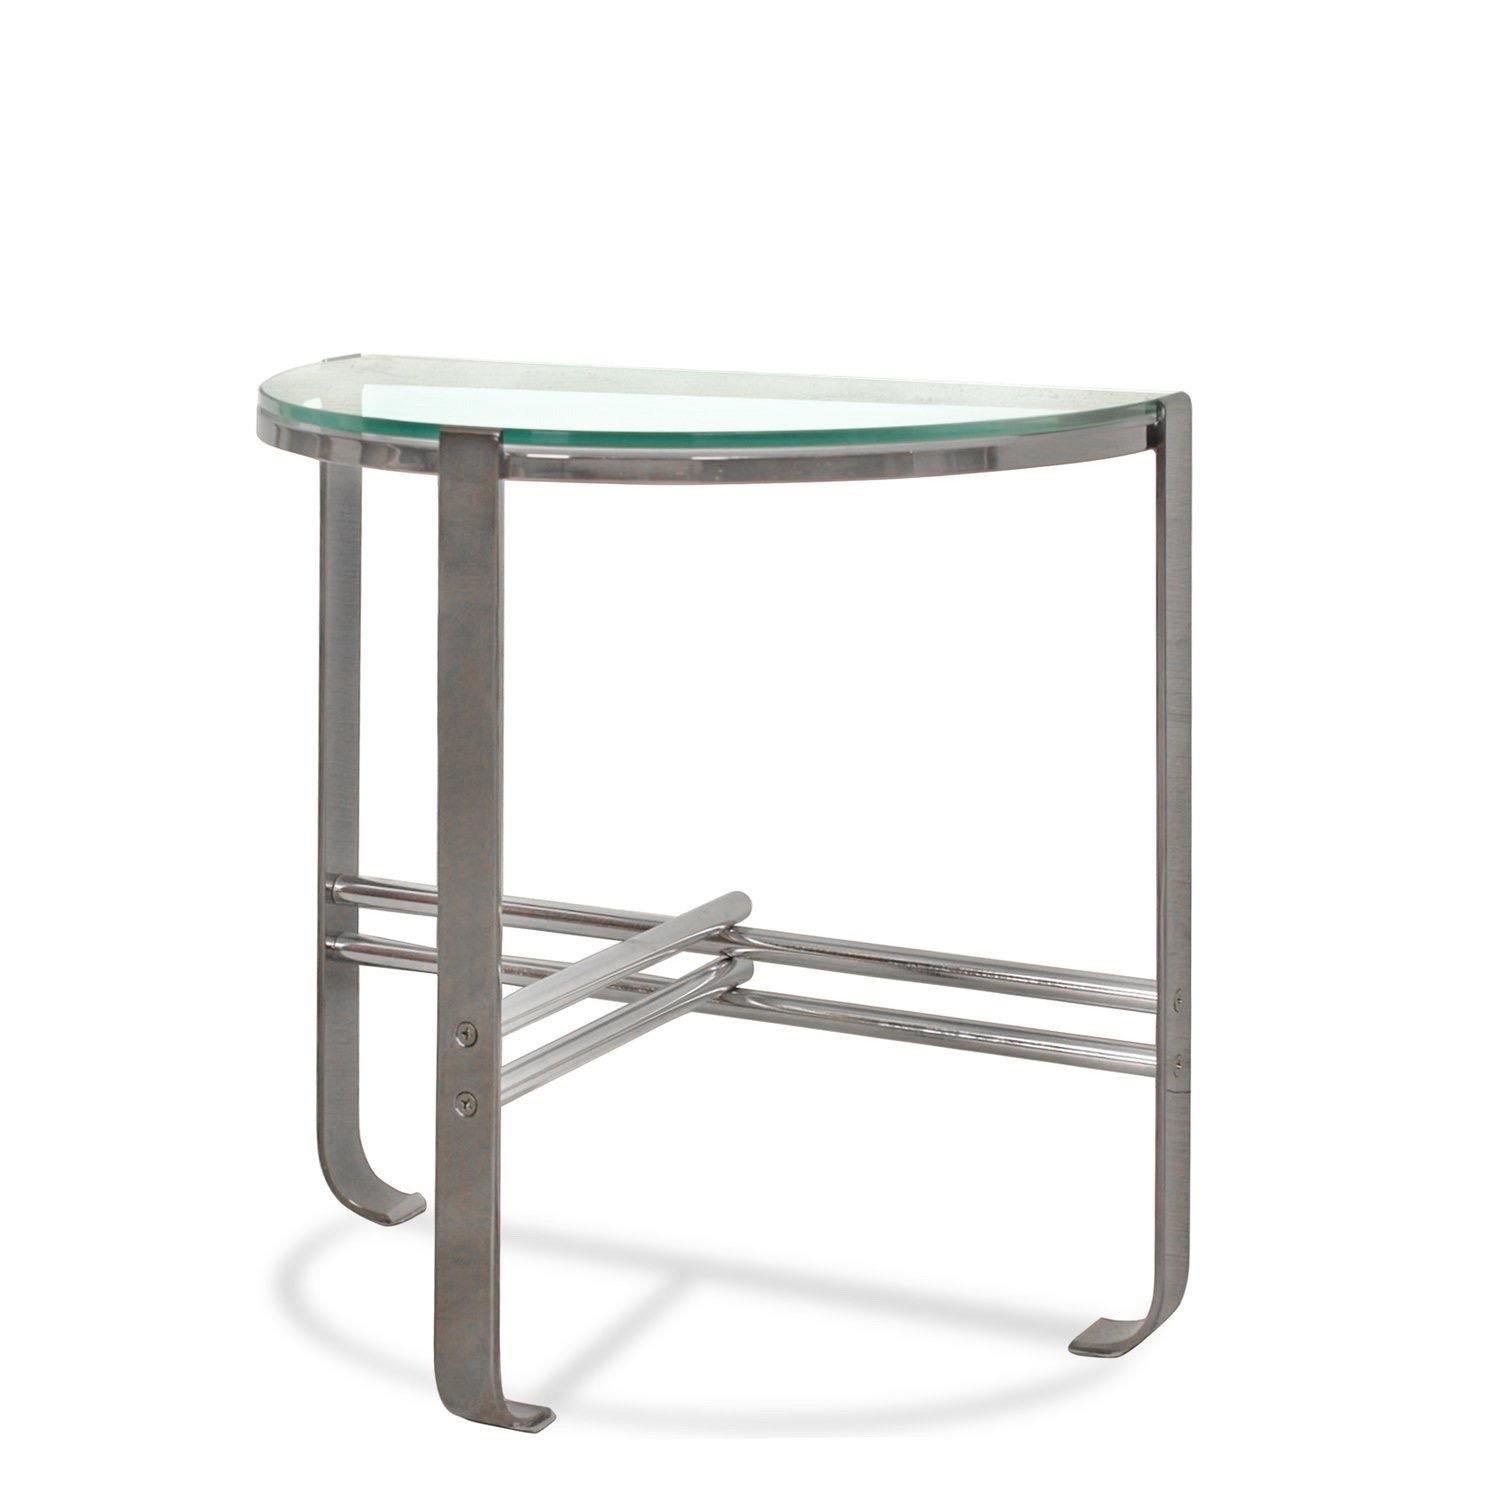 A vintage chromed metal demi-lune hall table inset with a glass top.  In the style of Josef Hoffman.

Dimensions: 22.5” L x 12” D x 22” H